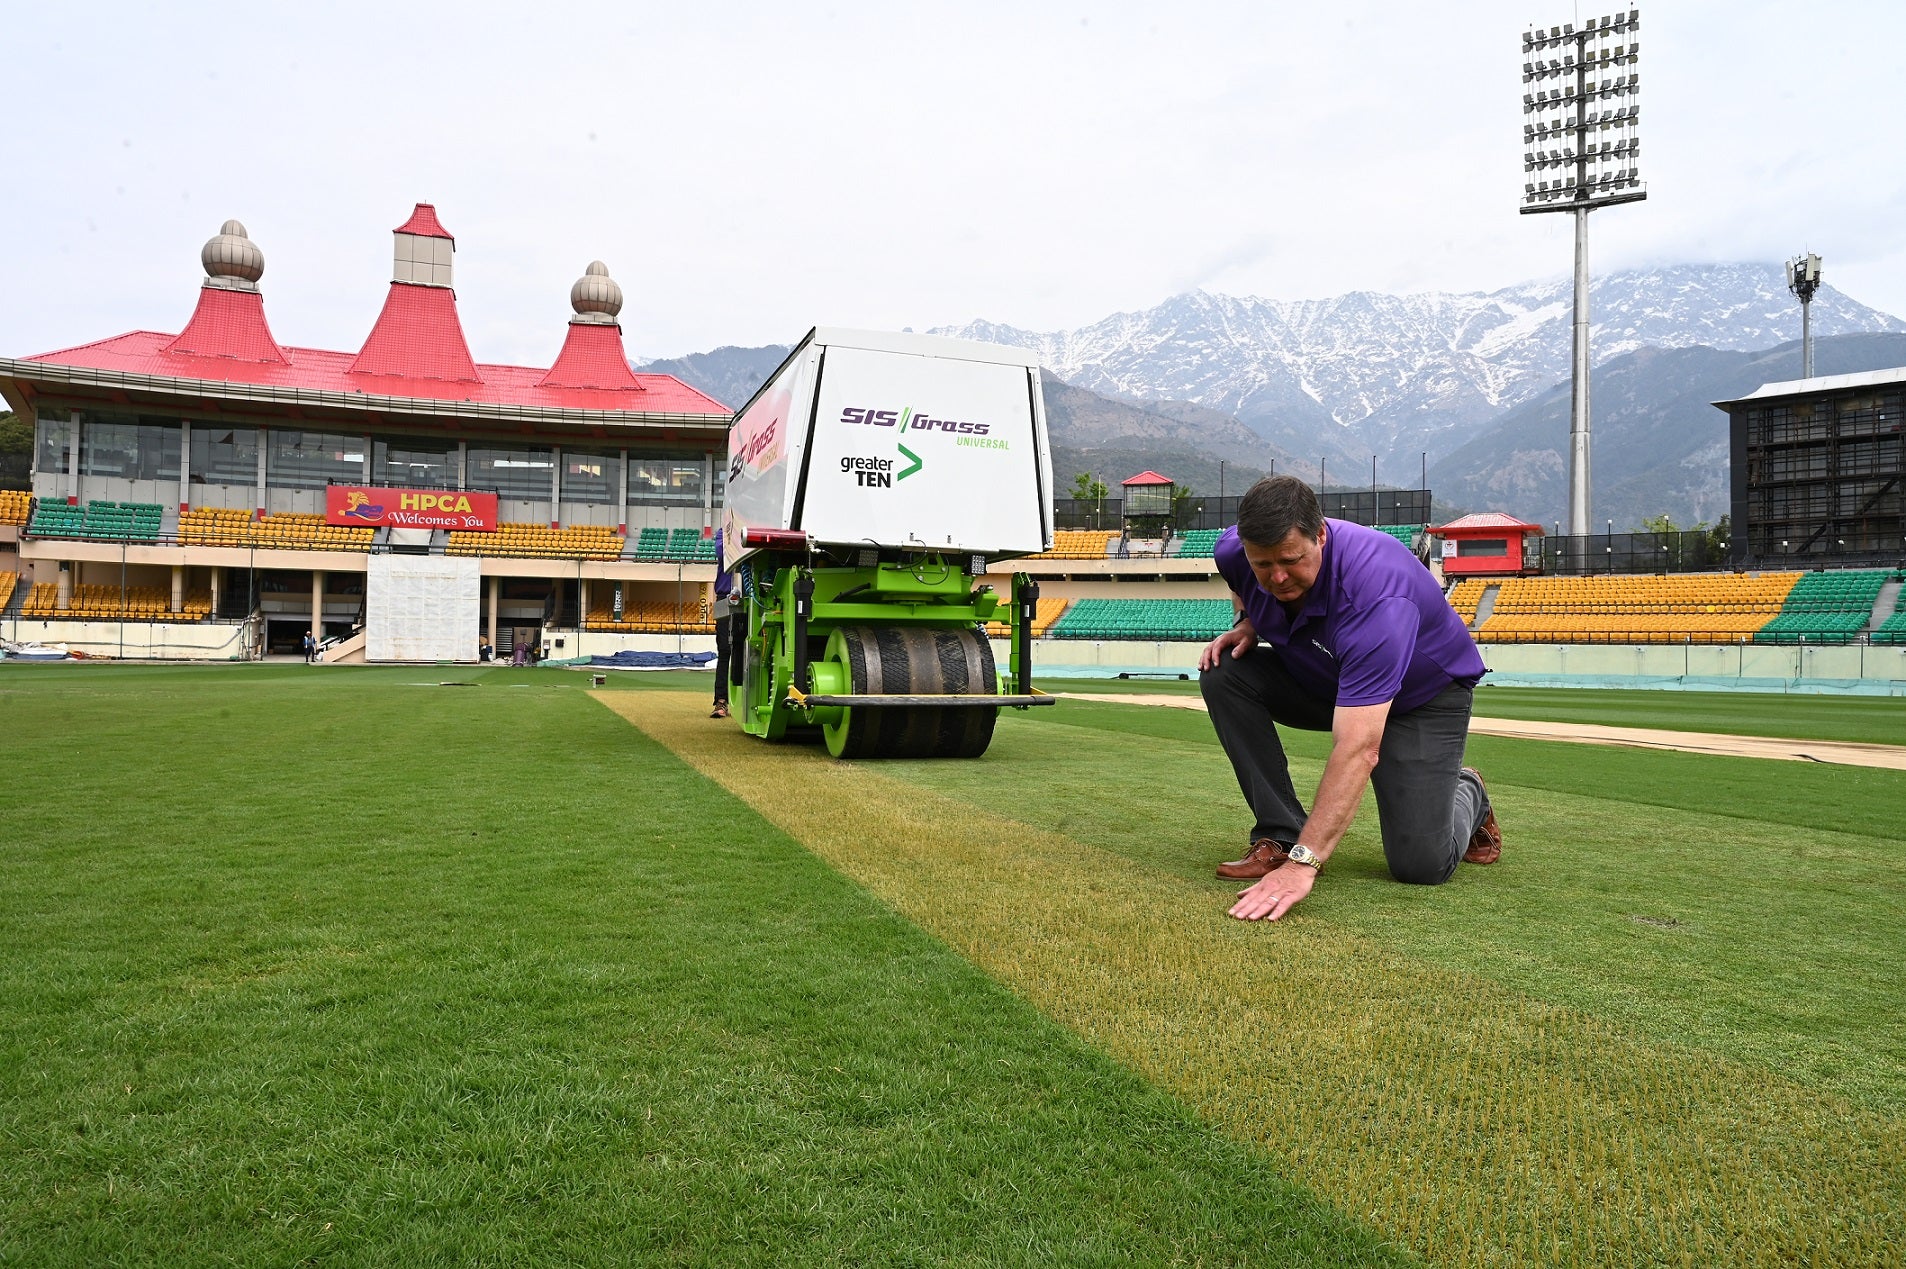 SISGrass invests in Indian cricket for next phase of hybrid pitch revolution